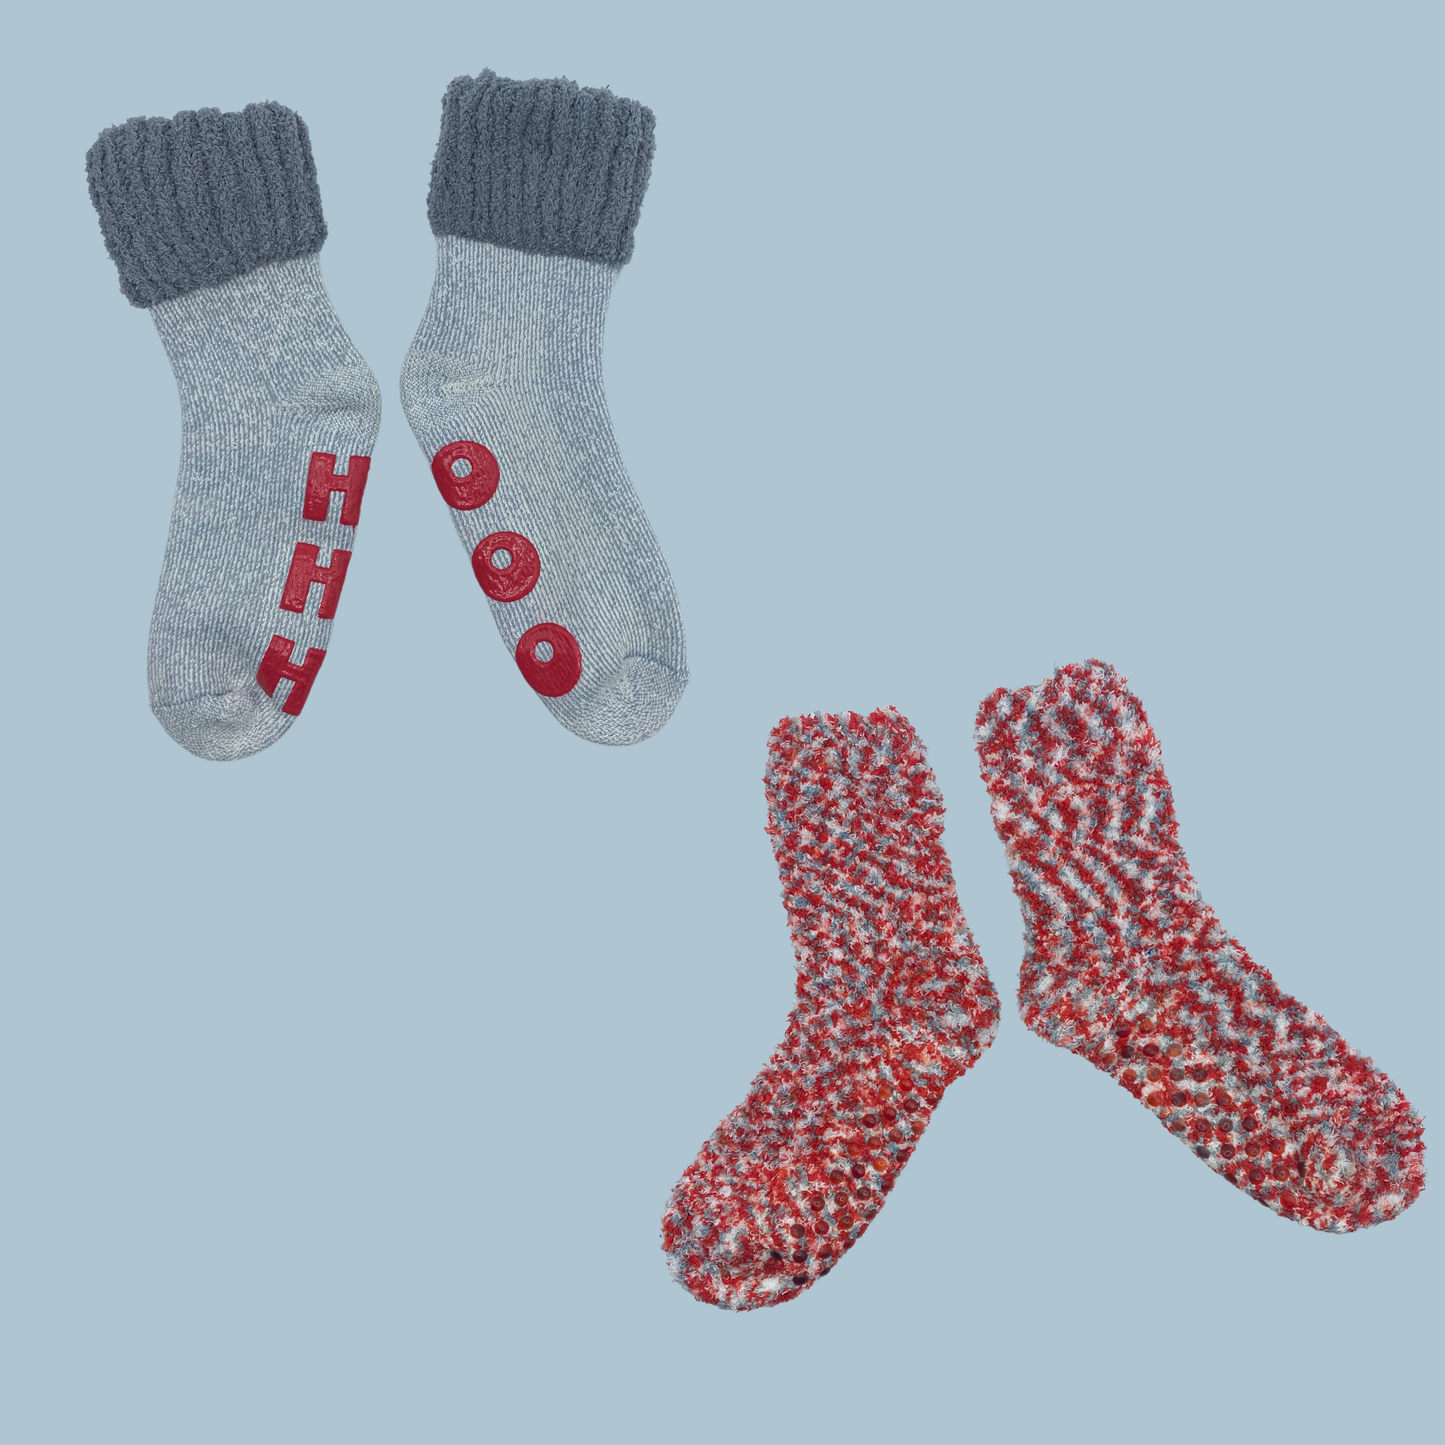 HO HO HO Holiday Slipper Socks with Grippers 2 Pack